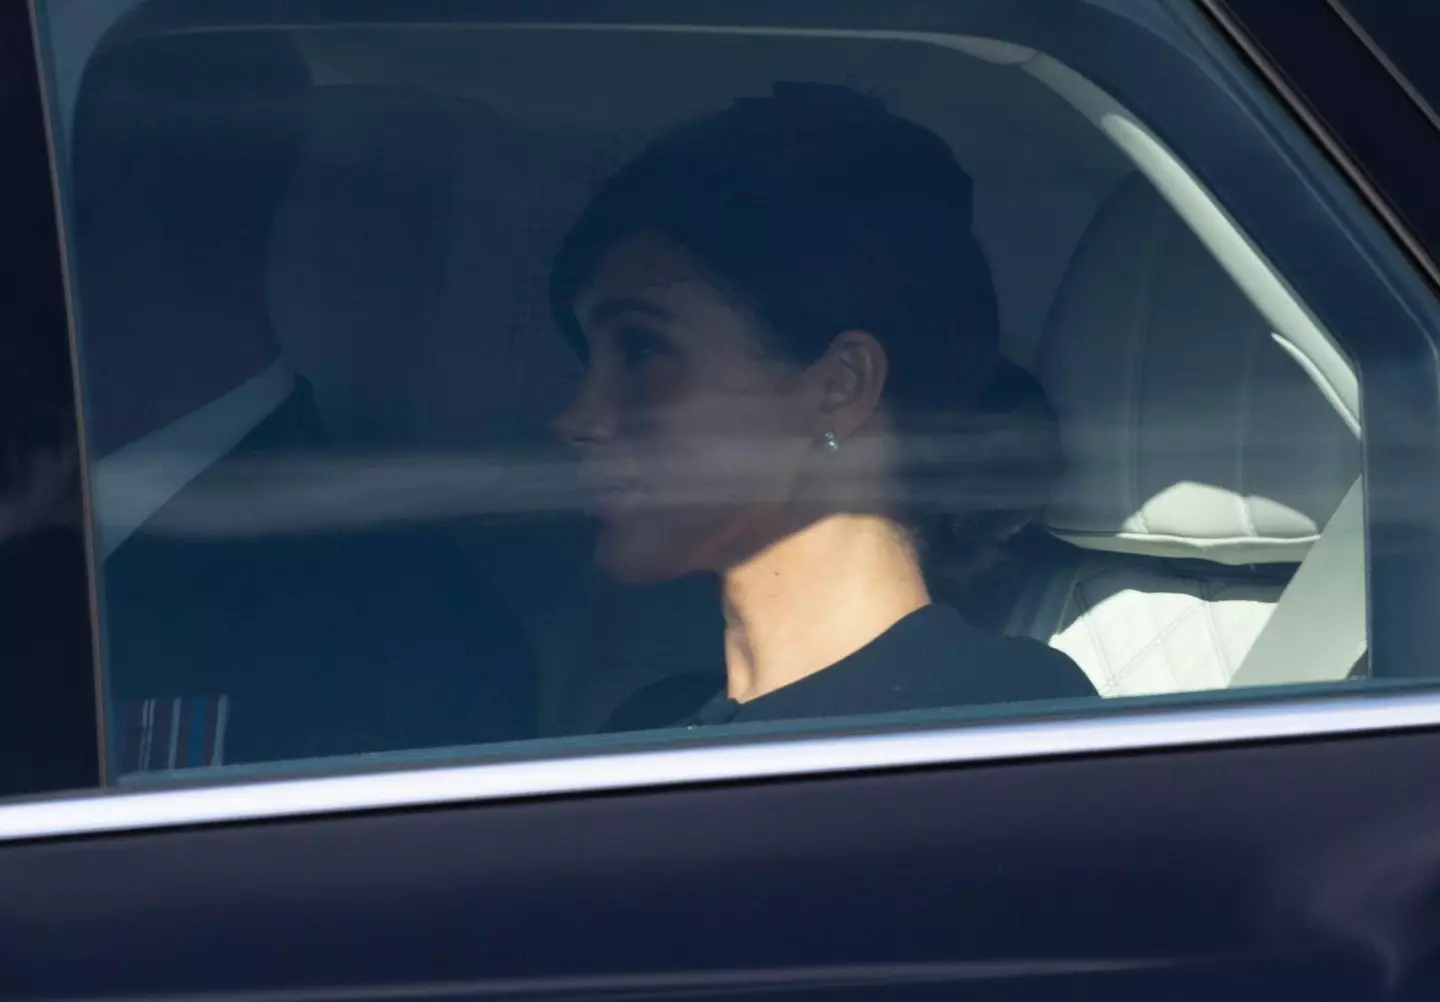 Meghan, travelling separately from Kate.